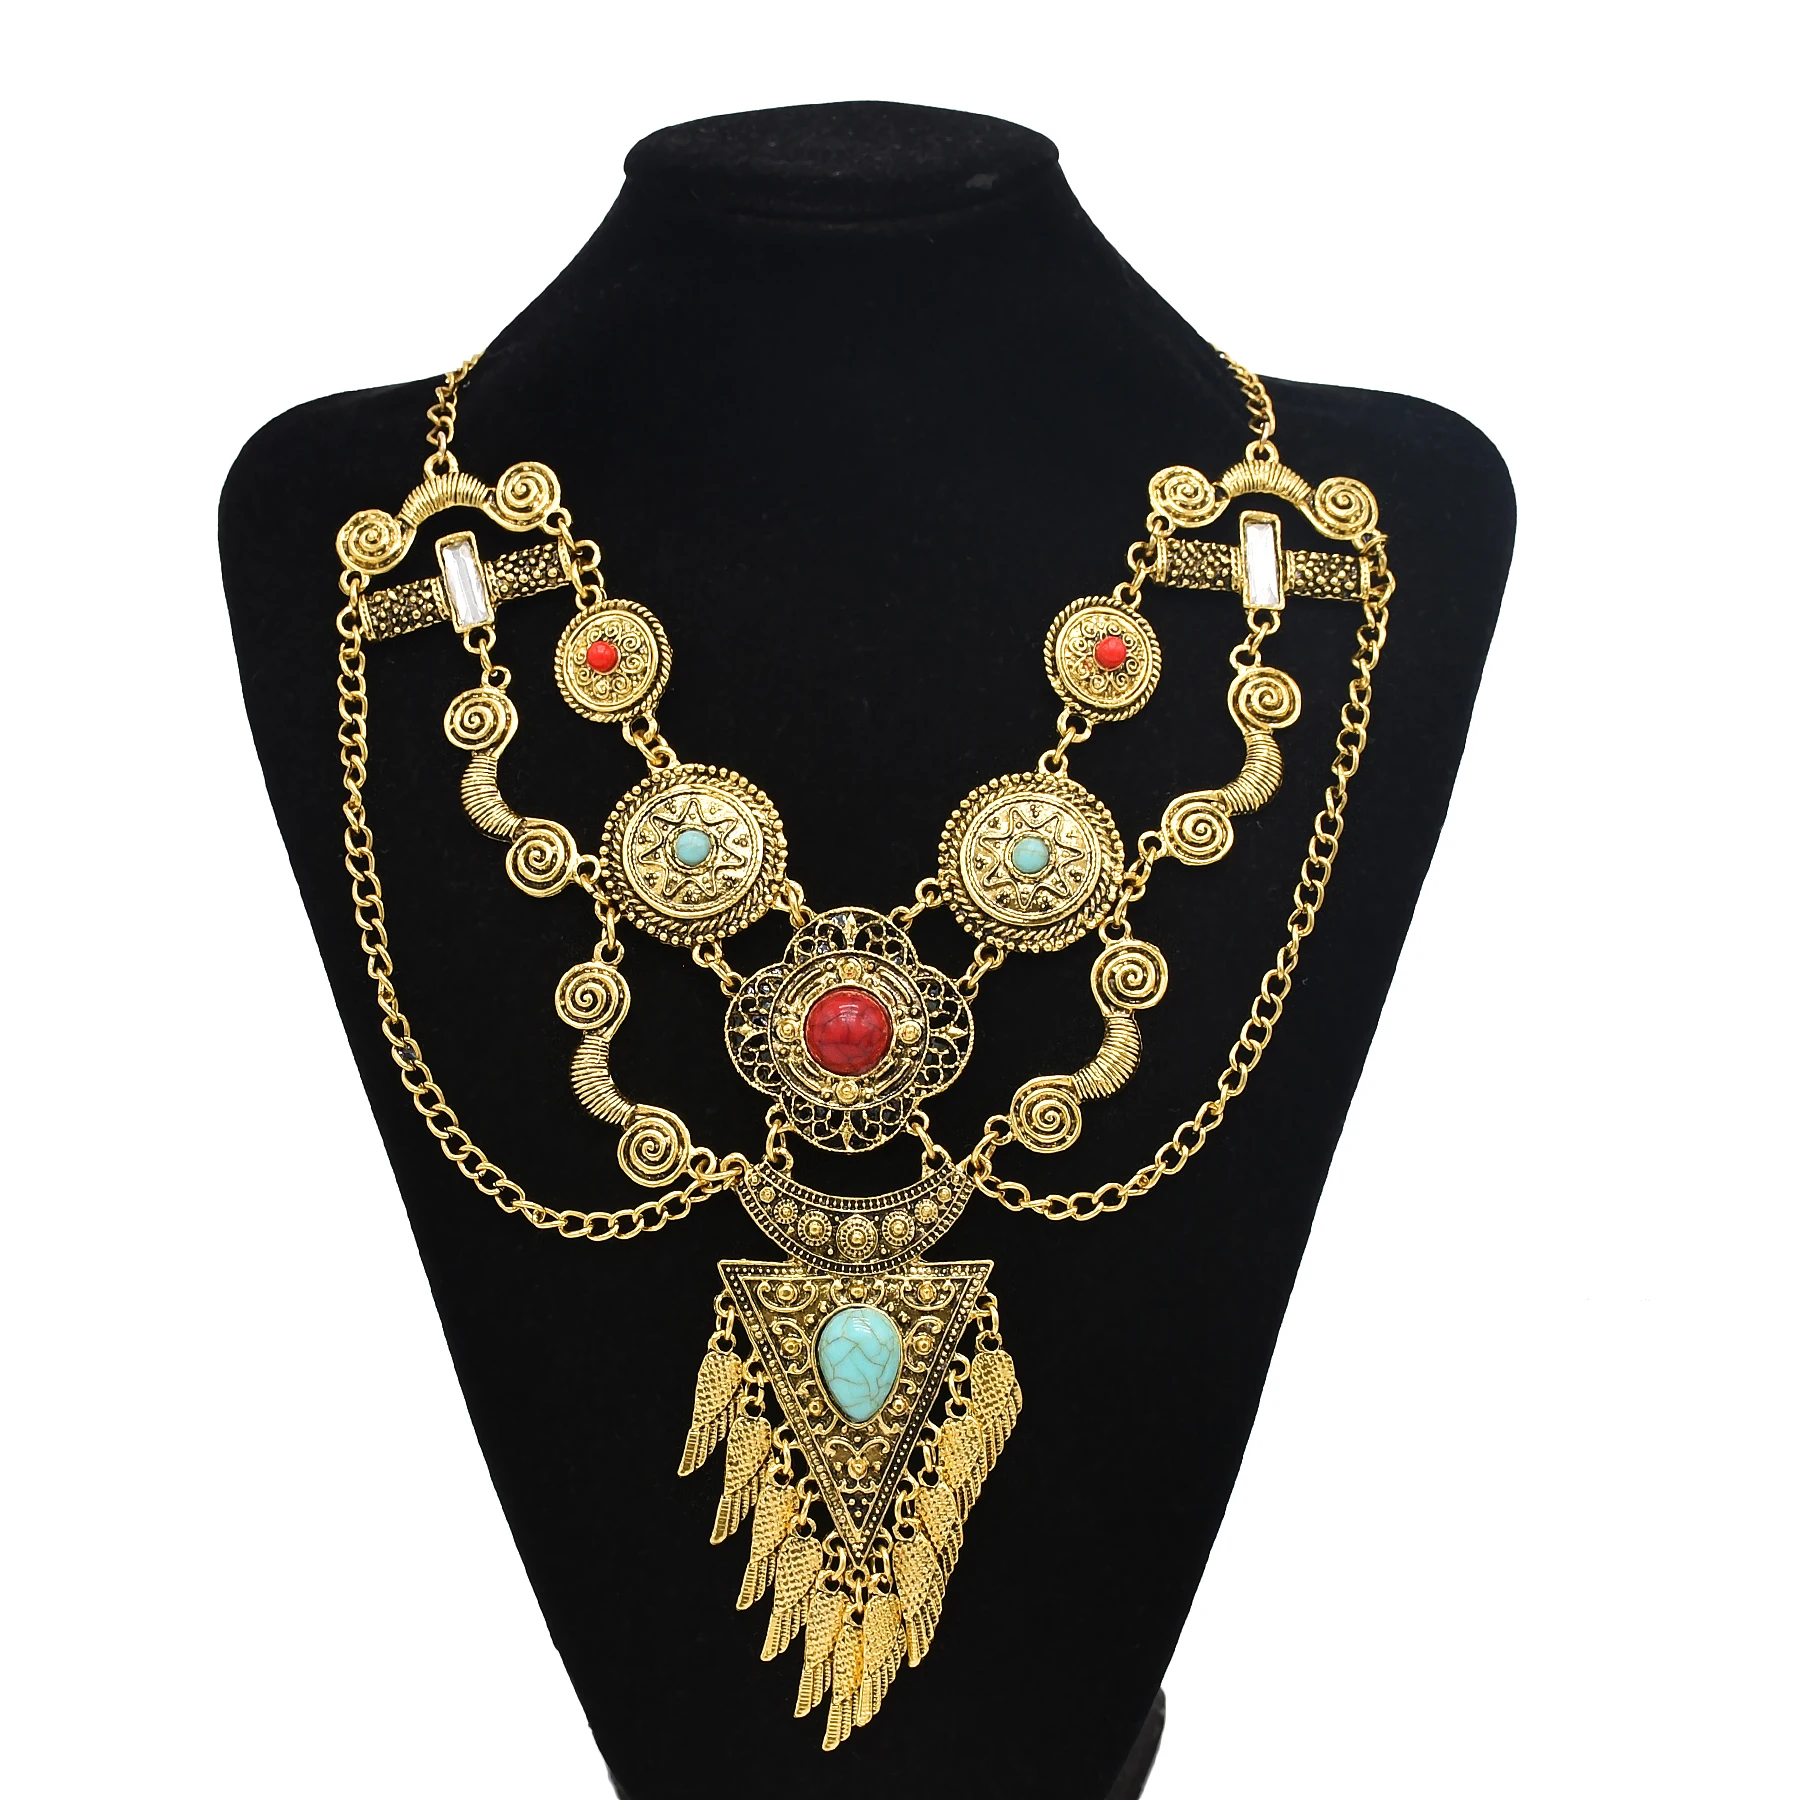 

Indian Vintage Big Coin Necklaces for Women Female Afghan Exaggerated Statement Choker Collar Necklace Ethnic Party Jewelry Gift